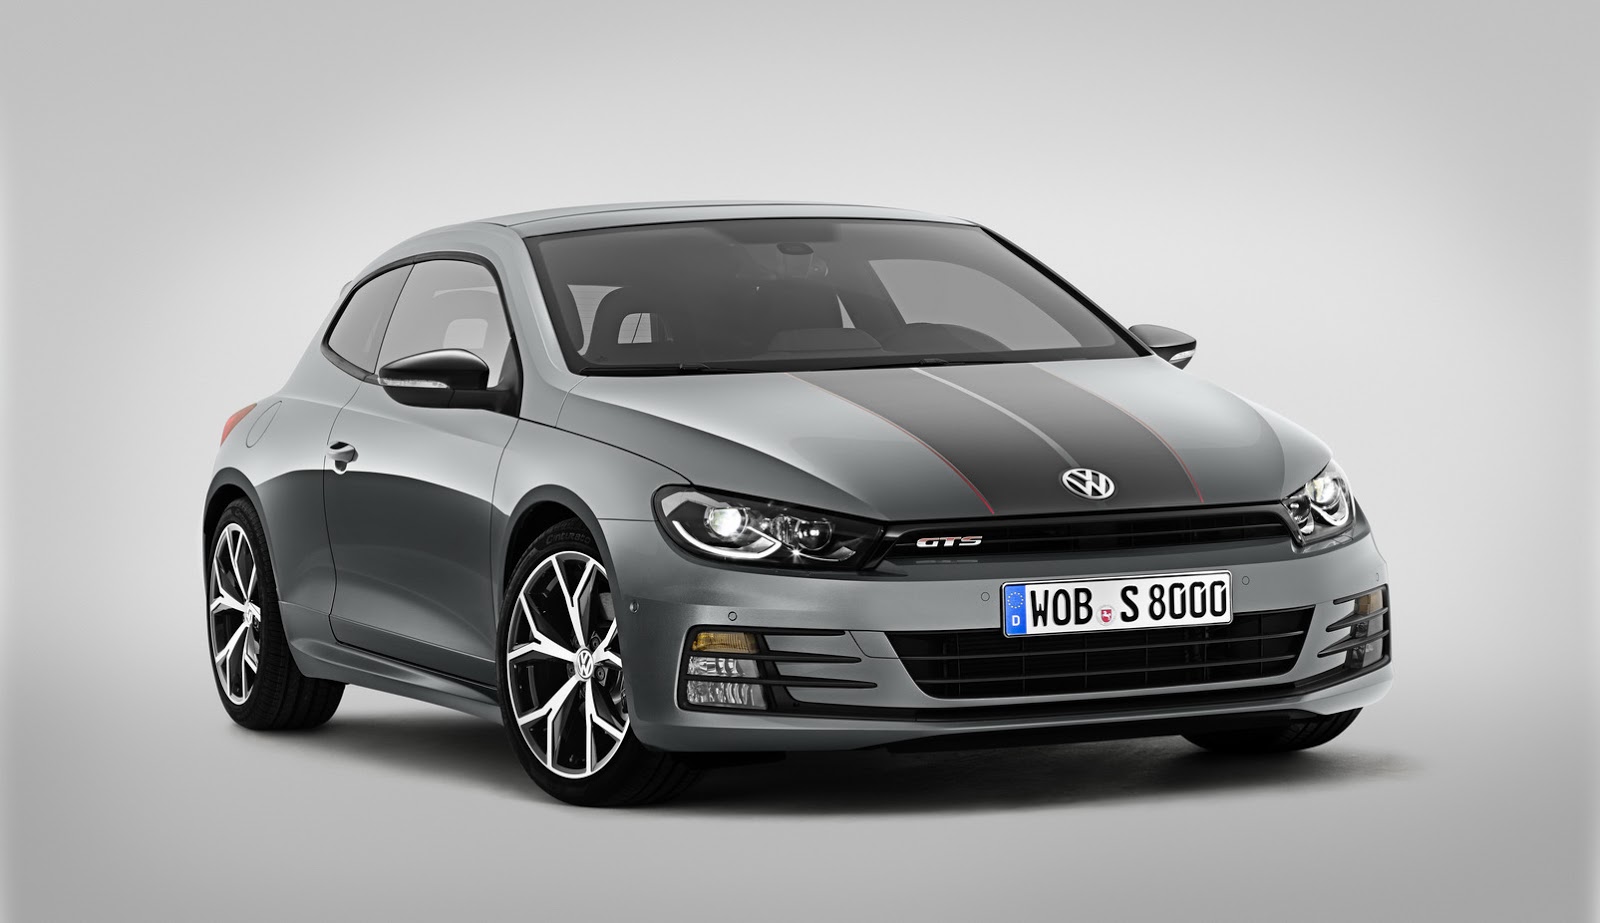 New 2015 VW Scirocco GTS To Debut In Shanghai